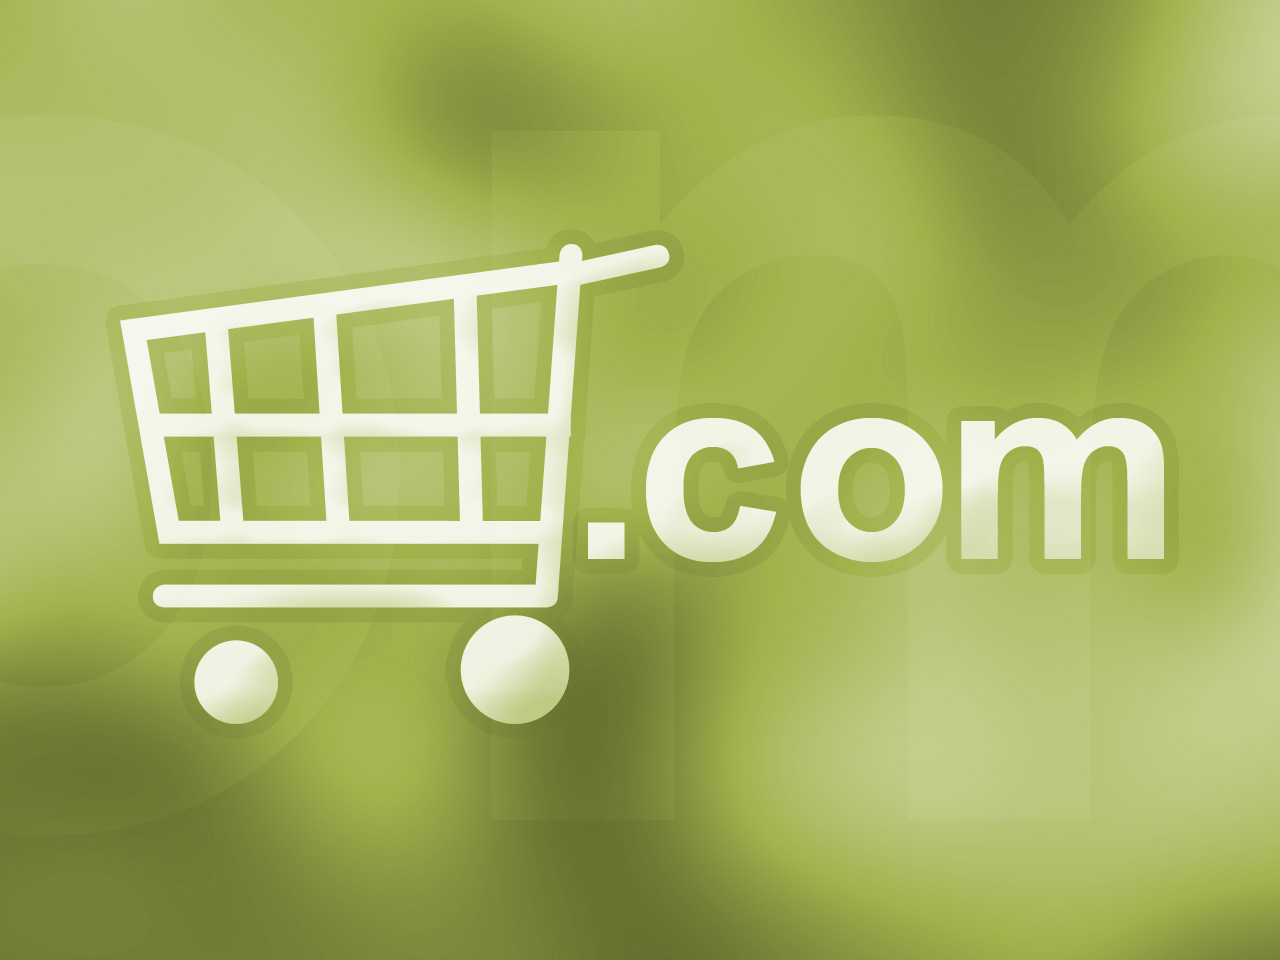 Shopping cart icon and dot com